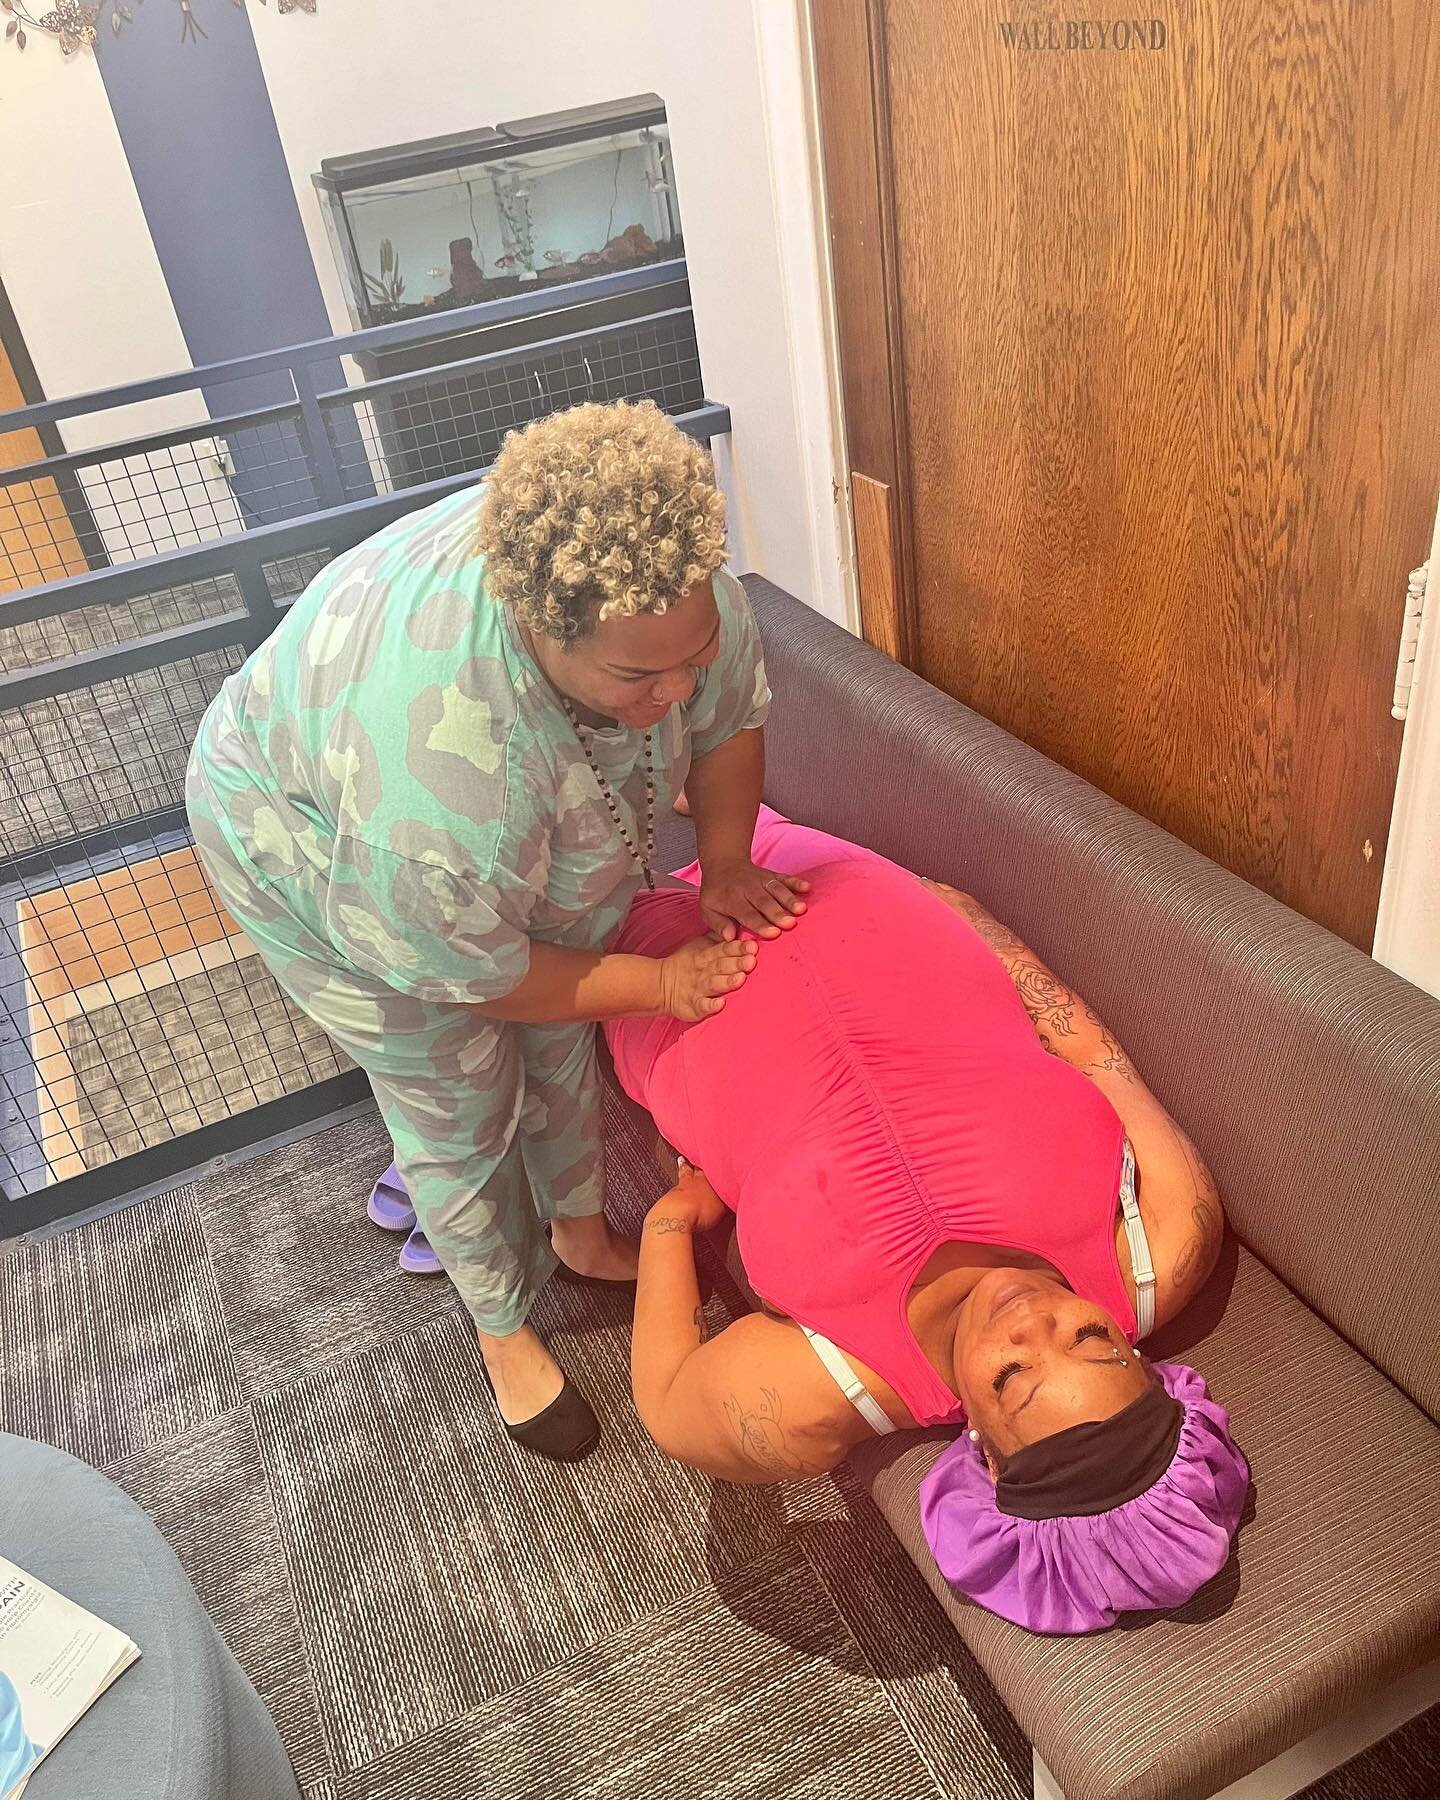 If you saw my post yesterday, you know I&rsquo;ve been teaching a childbirth class for Black families with @milestonecreationsllc and @oilydoulamn - This is our second cohort and I love for these classes and these families. We had a little fun on Wed